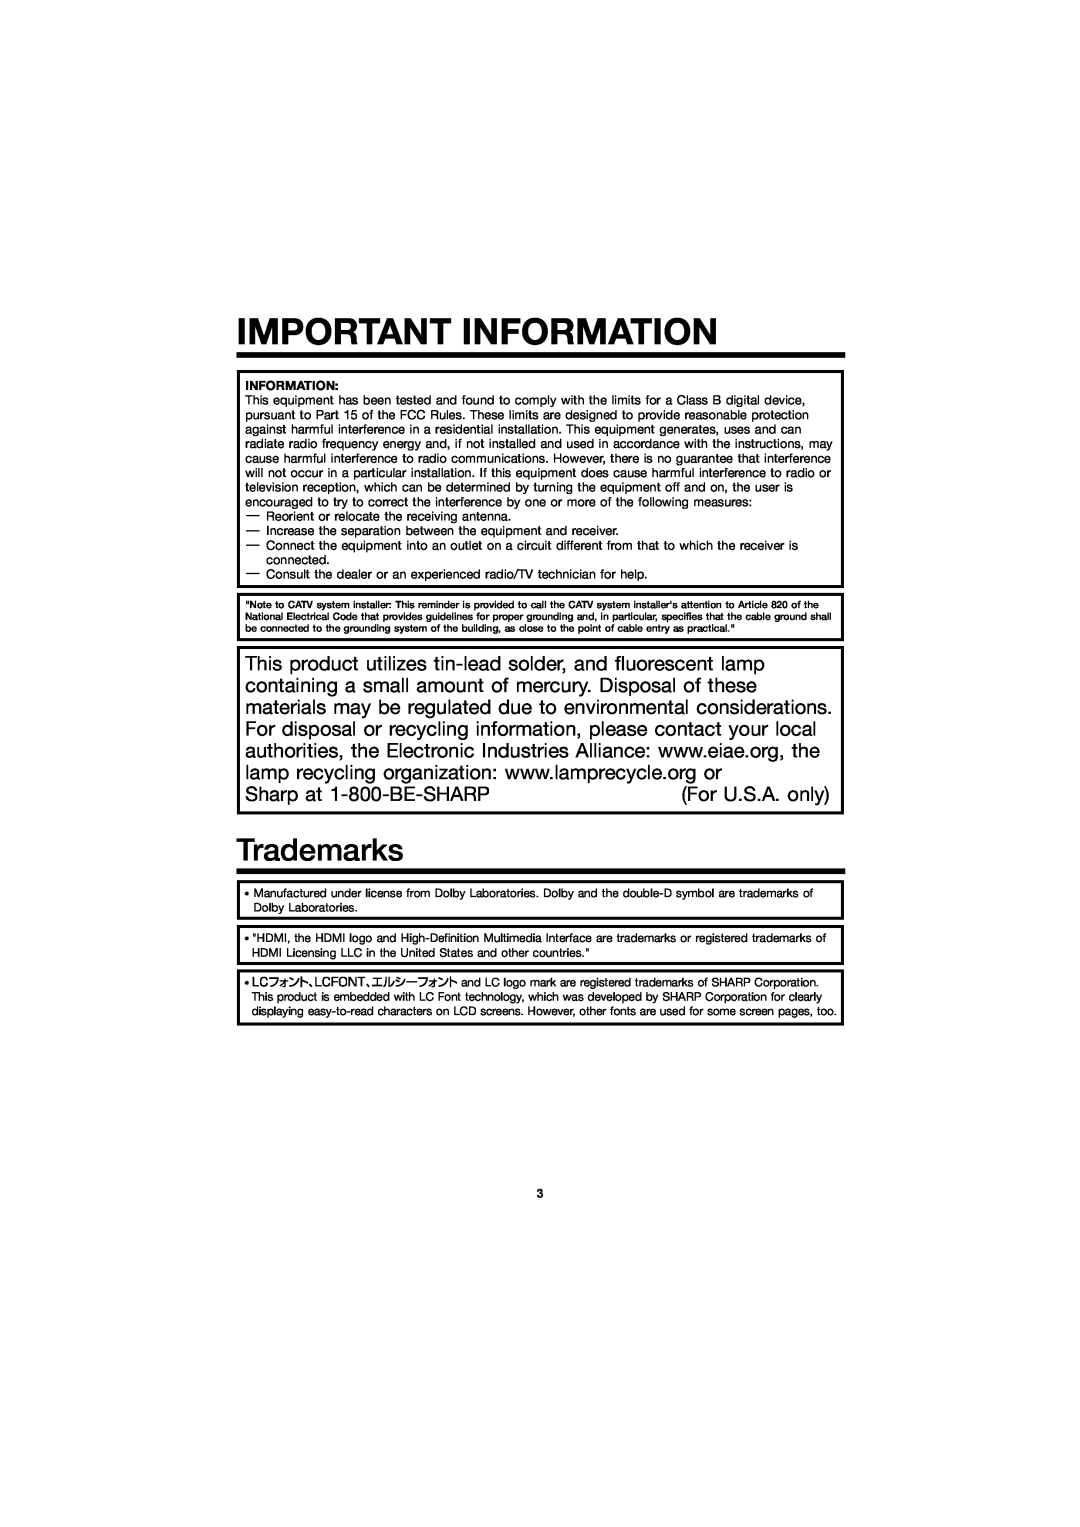 Sharp LC-60E79U operation manual Sharp at 1-800-BE-SHARP, For U.S.A. only, Important Information, Trademarks 